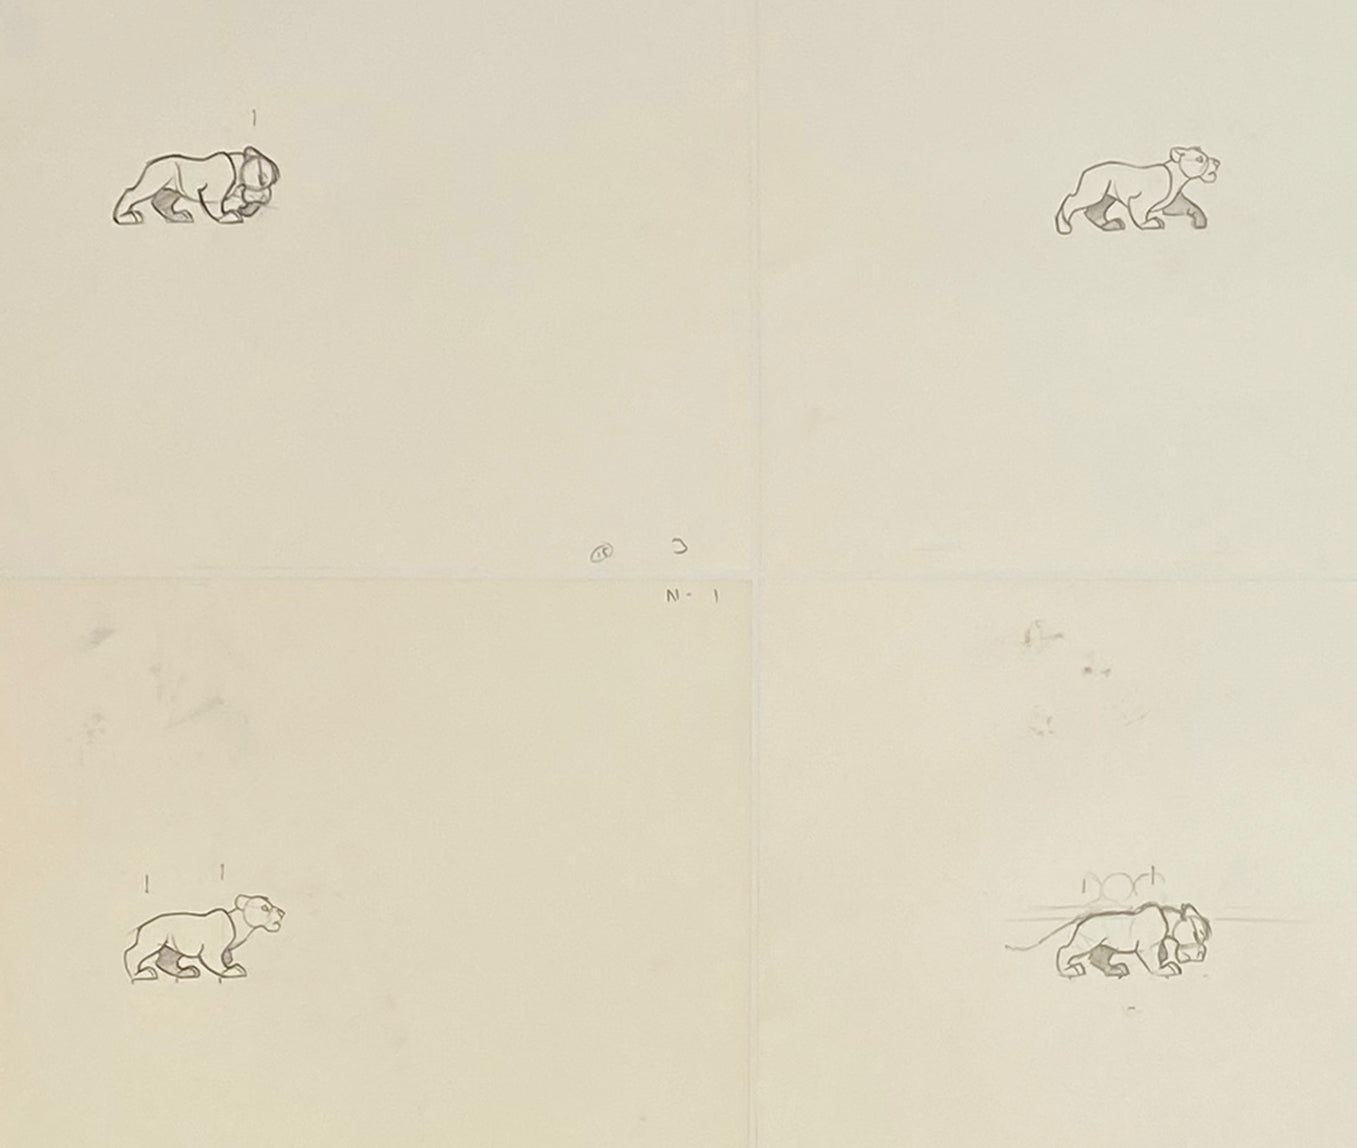 Original Walt Disney Sequence of 4 Production Drawings from The Lion King featuring Simba